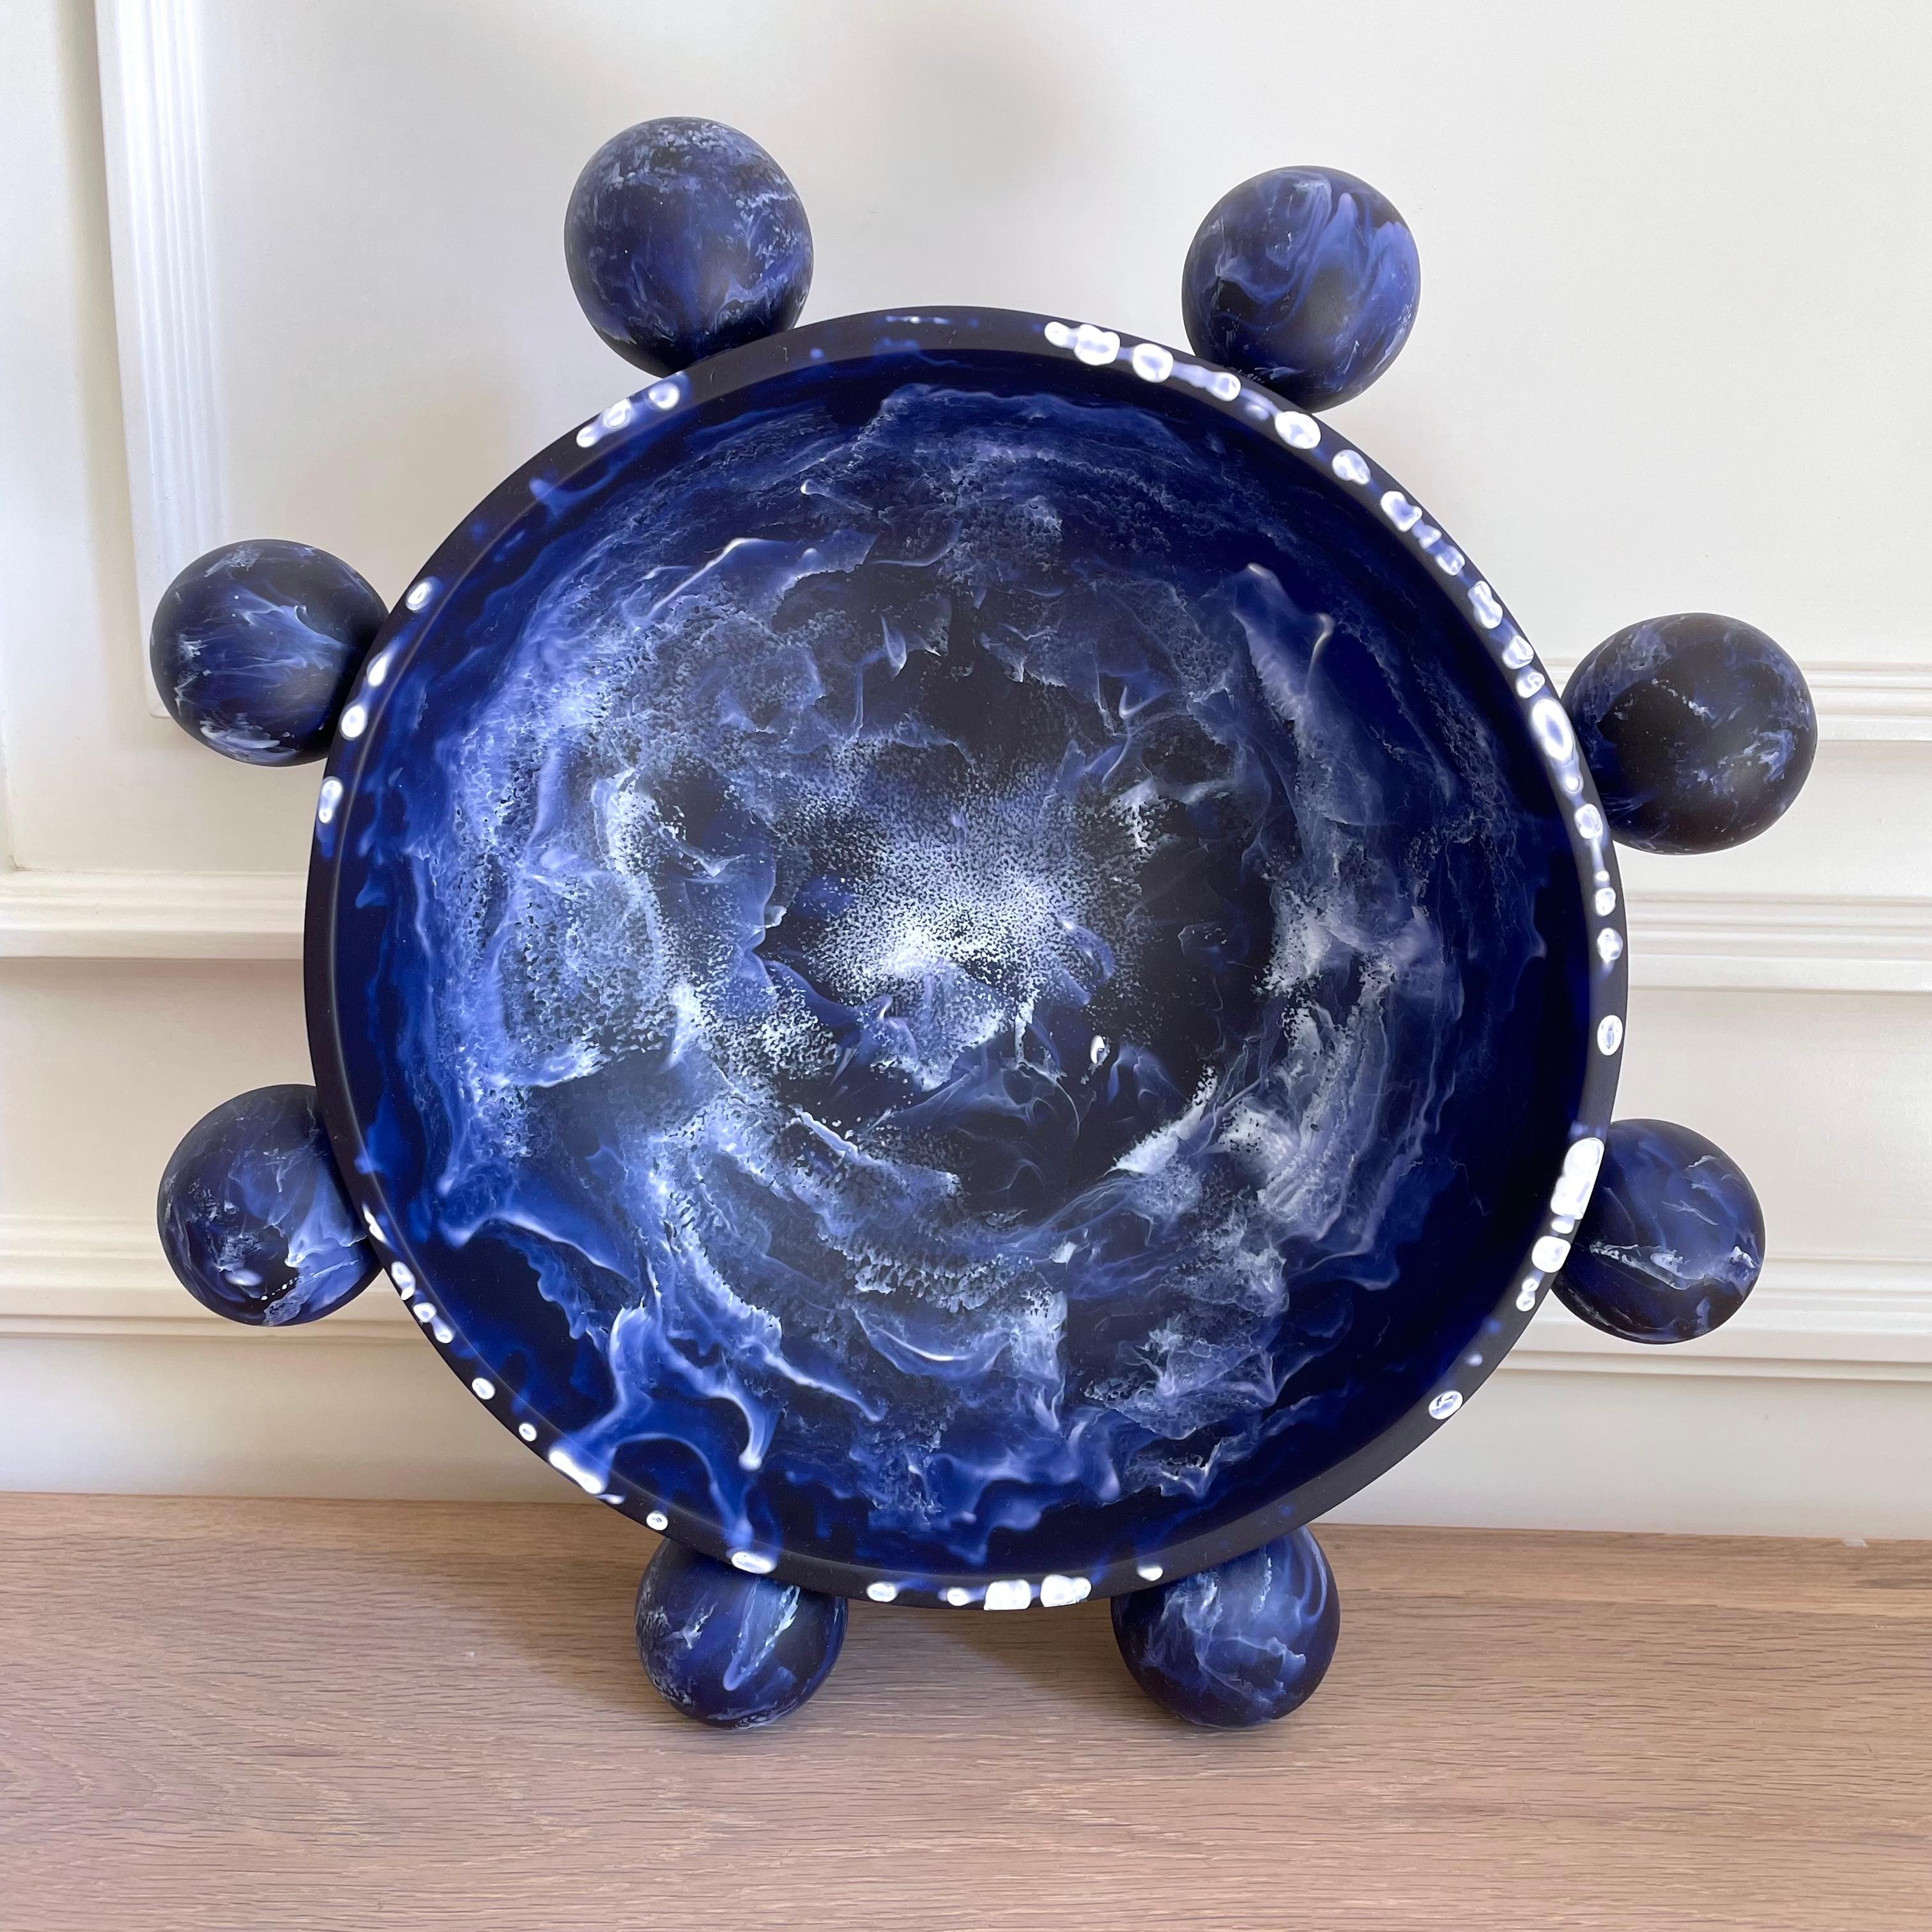 Cast Bubble Bowl in Marbled Navy Blue Resin by Paola Valle For Sale